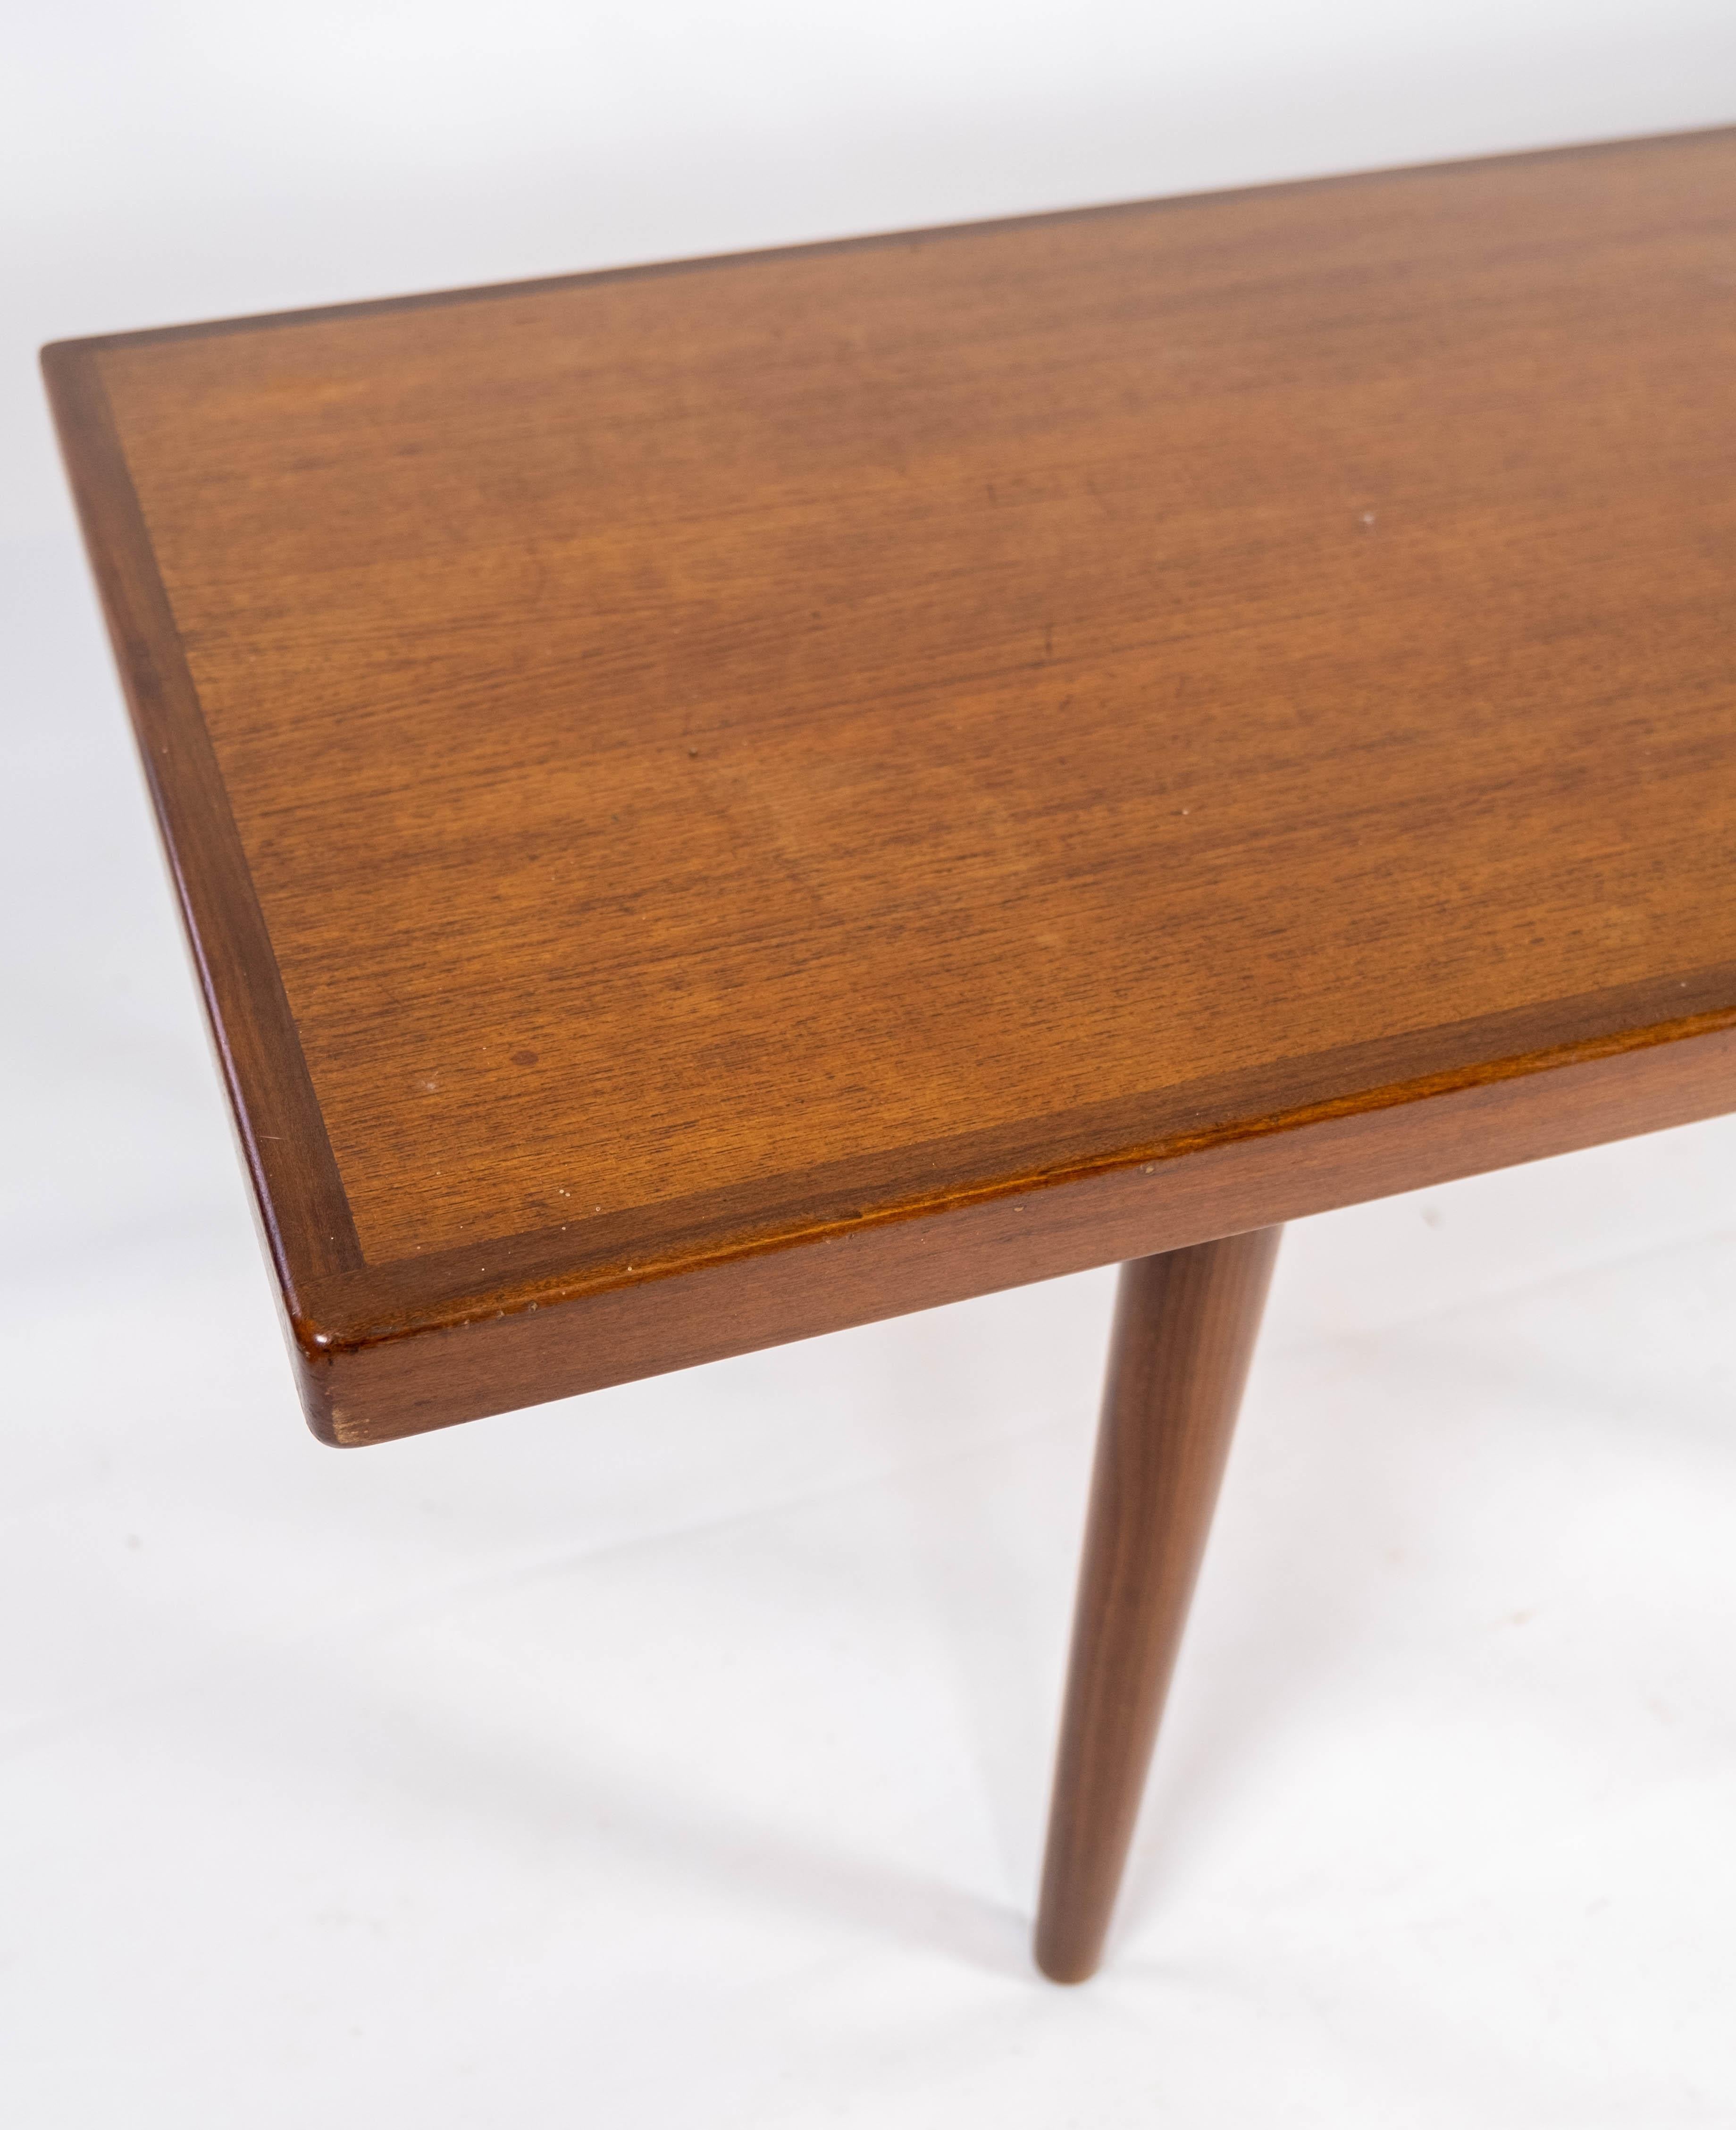 Coffee Table Made In Teak, Danish Design From 1960s In Good Condition For Sale In Lejre, DK